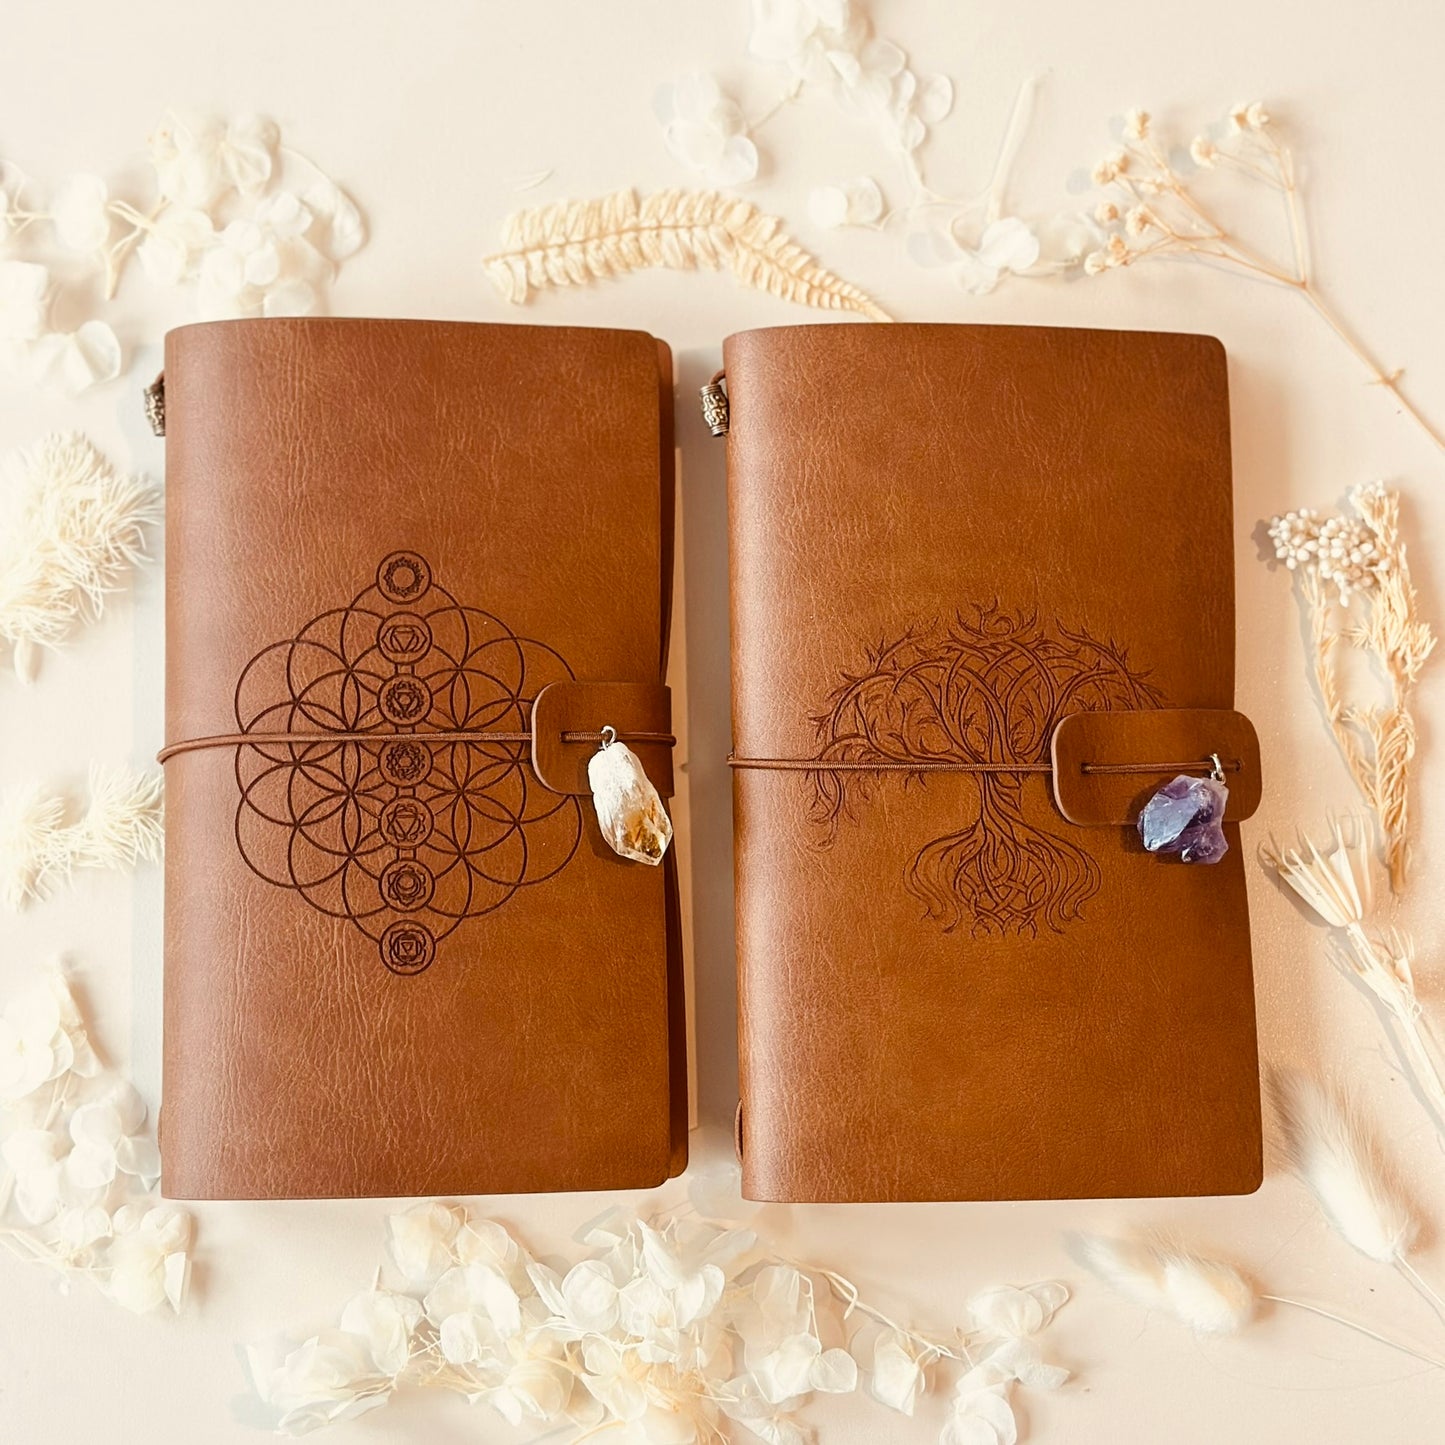 Chakra and Tree of Life Crystal Charm Leather Manifestation Journals